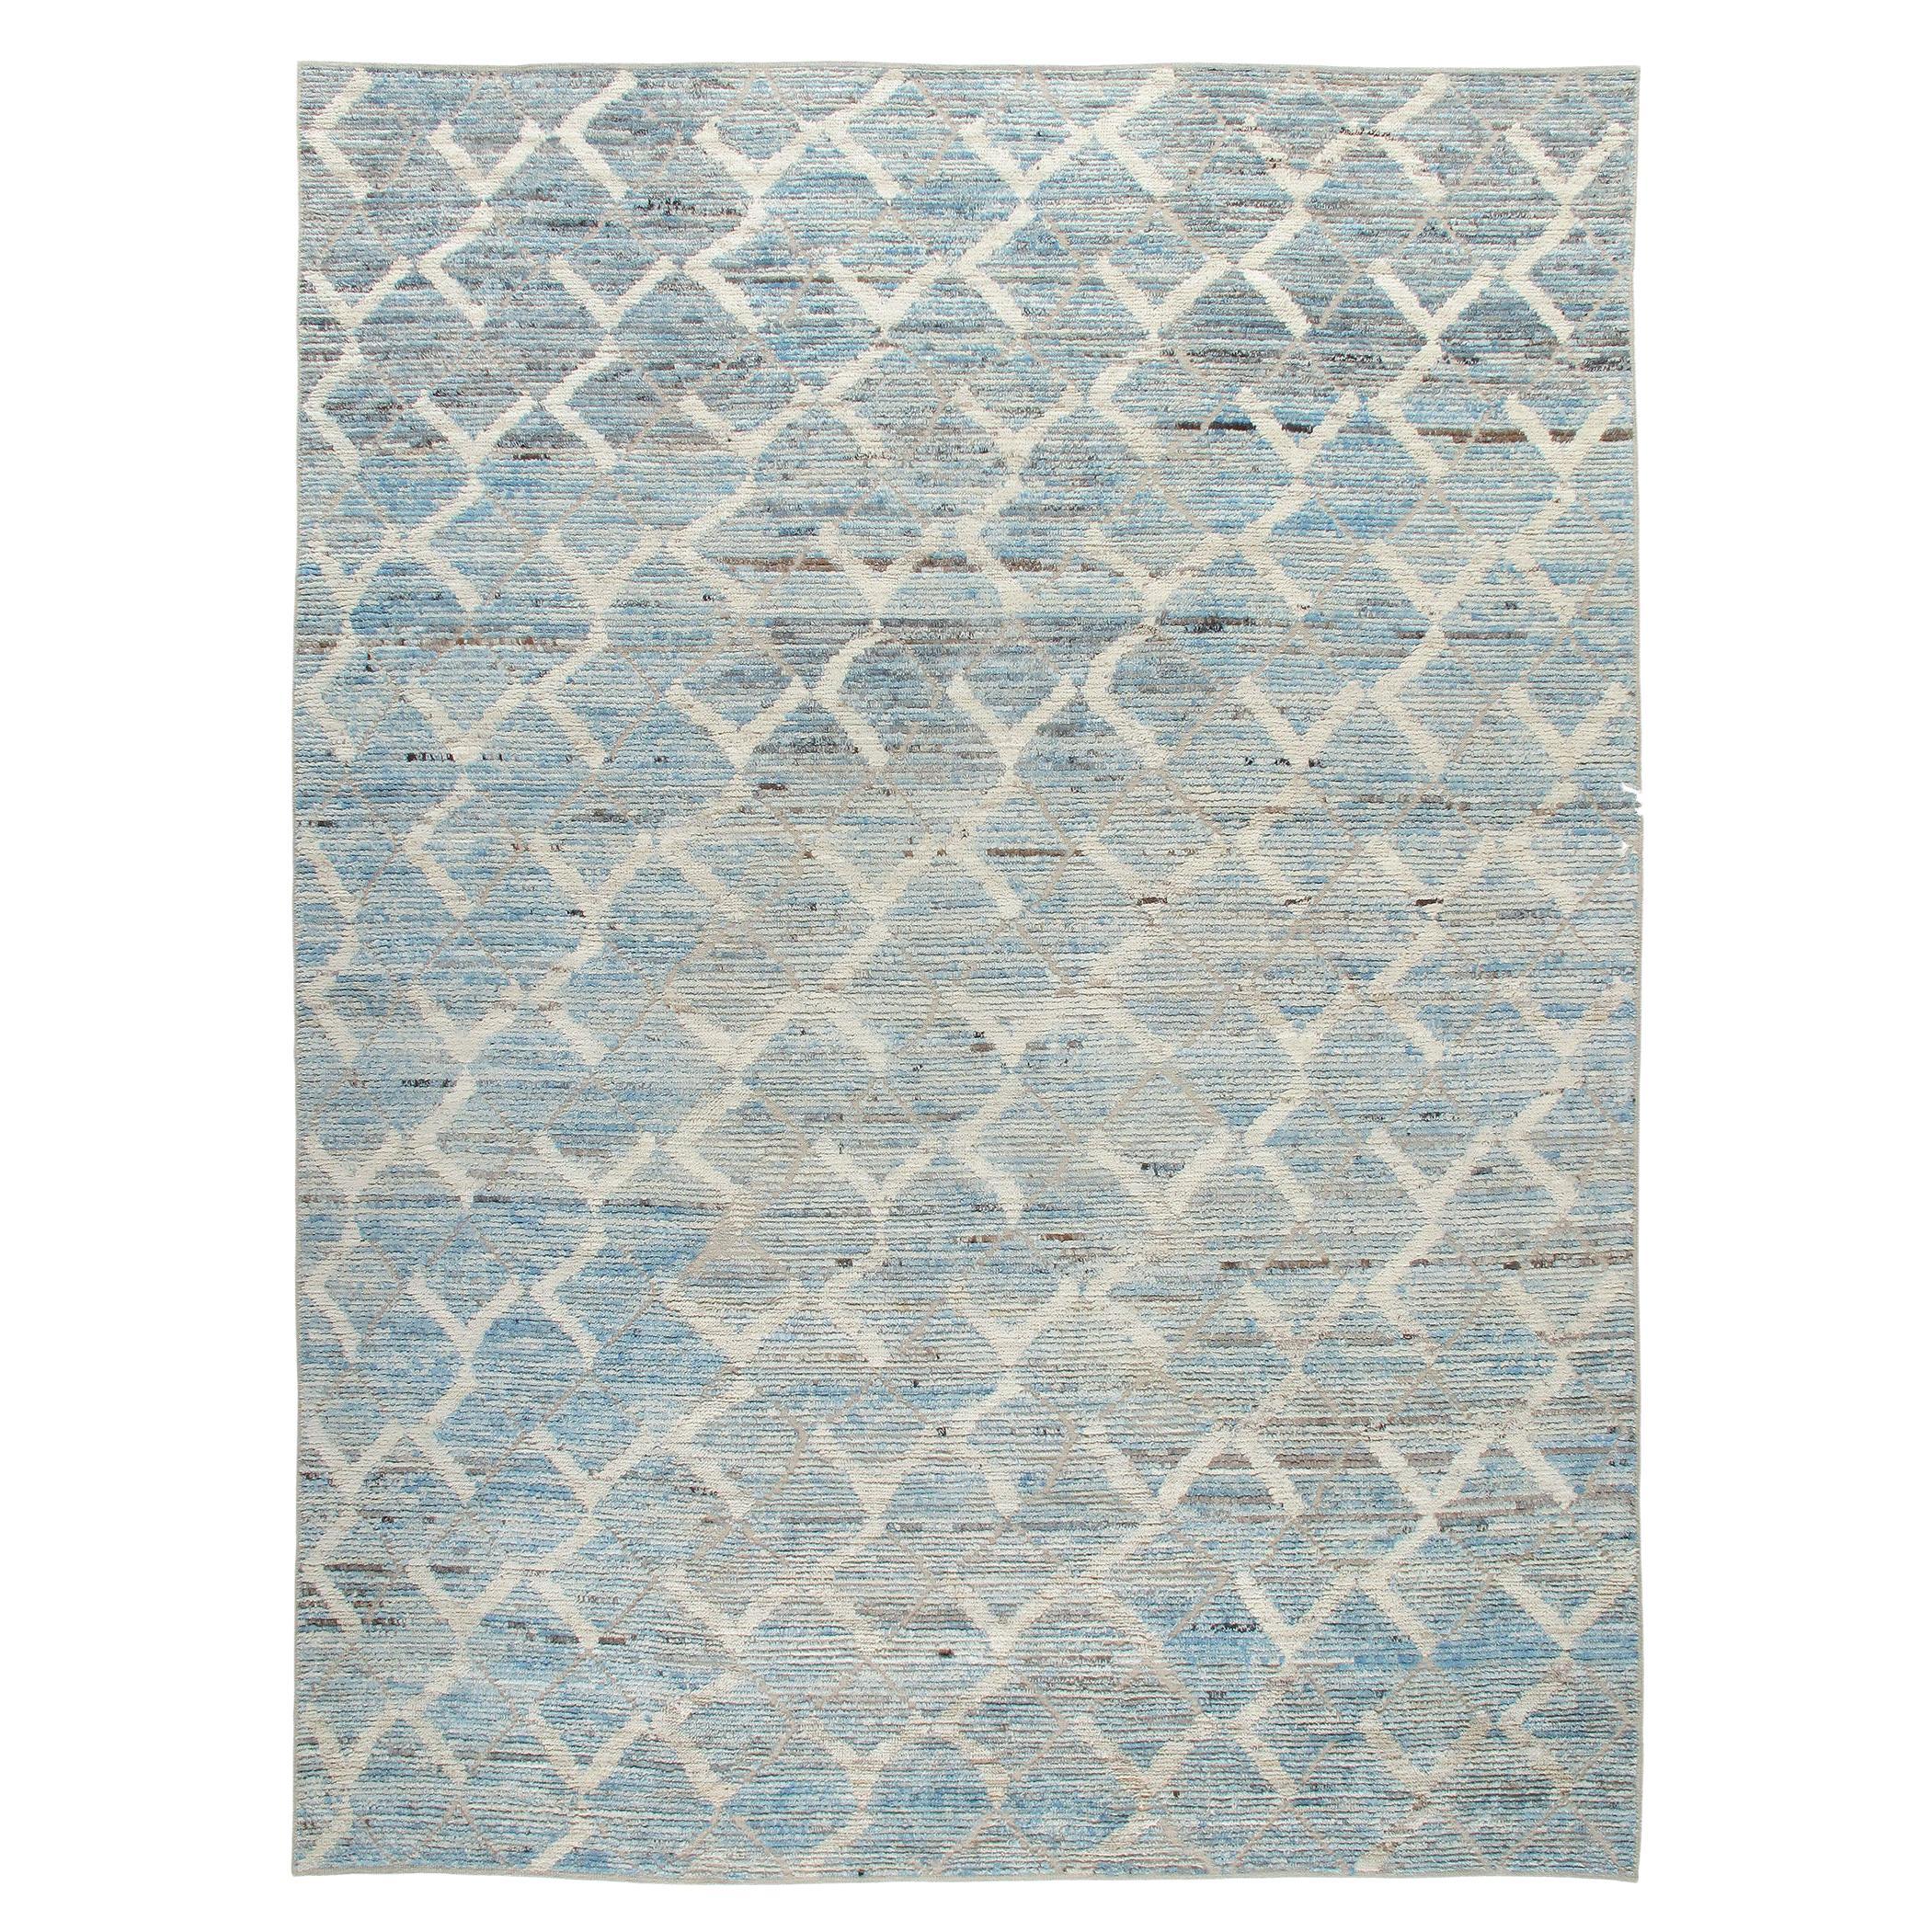 Modern Decorative Blue Rug with an Abstract Design